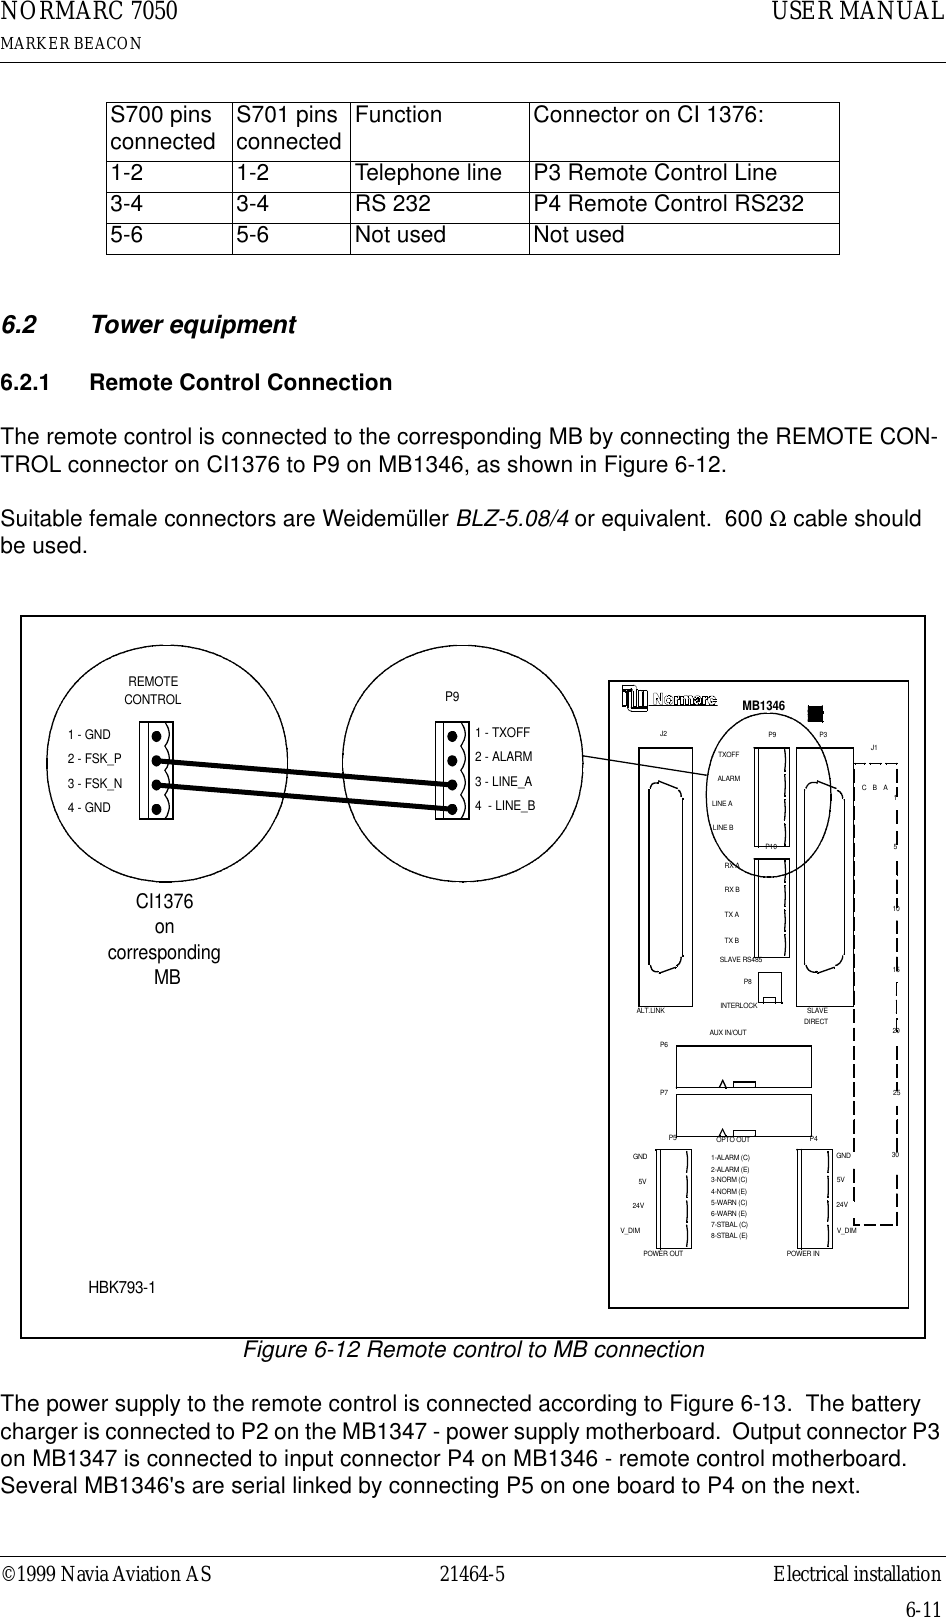 ©1999 Navia Aviation AS 21464-5 Electrical installationUSER MANUALNORMARC 7050MARKER BEACON6-116.2 Tower equipment6.2.1 Remote Control ConnectionThe remote control is connected to the corresponding MB by connecting the REMOTE CON-TROL connector on CI1376 to P9 on MB1346, as shown in Figure 6-12.Suitable female connectors are Weidemüller BLZ-5.08/4 or equivalent.  600 Ω cable should be used.Figure 6-12 Remote control to MB connectionThe power supply to the remote control is connected according to Figure 6-13.  The battery charger is connected to P2 on the MB1347 - power supply motherboard.  Output connector P3 on MB1347 is connected to input connector P4 on MB1346 - remote control motherboard.  Several MB1346&apos;s are serial linked by connecting P5 on one board to P4 on the next.S700 pins connected S701 pins connected Function Connector on CI 1376:1-2 1-2 Telephone line P3 Remote Control Line3-4 3-4 RS 232 P4 Remote Control RS2325-6 5-6 Not used Not usedREMOTECONTROL1 - GND2 - FSK_P3 - FSK_N4 - GNDJ2 P3P6P7P4P5P9P10P8OPTO OUT2-ALARM (E)1-ALARM (C)4-NORM (E)5-WARN (C)6-WARN (E)7-STBAL (C)8-STBAL (E)3-NORM (C)GND5V24VV_DIMGND5V24VV_DIMPOWER OUT POWER INAUX IN/OUTSLAVEDIRECTINTERLOCKTXOFFALARMLINE ALINE BRX ARX BTX ATX BSLAVE RS485J1ABC153020251510ALT.LINKMB1346P91 - TXOFF2 - ALARM3 - LINE_A4  - LINE_BCI1376 on corresponding MBHBK793-1